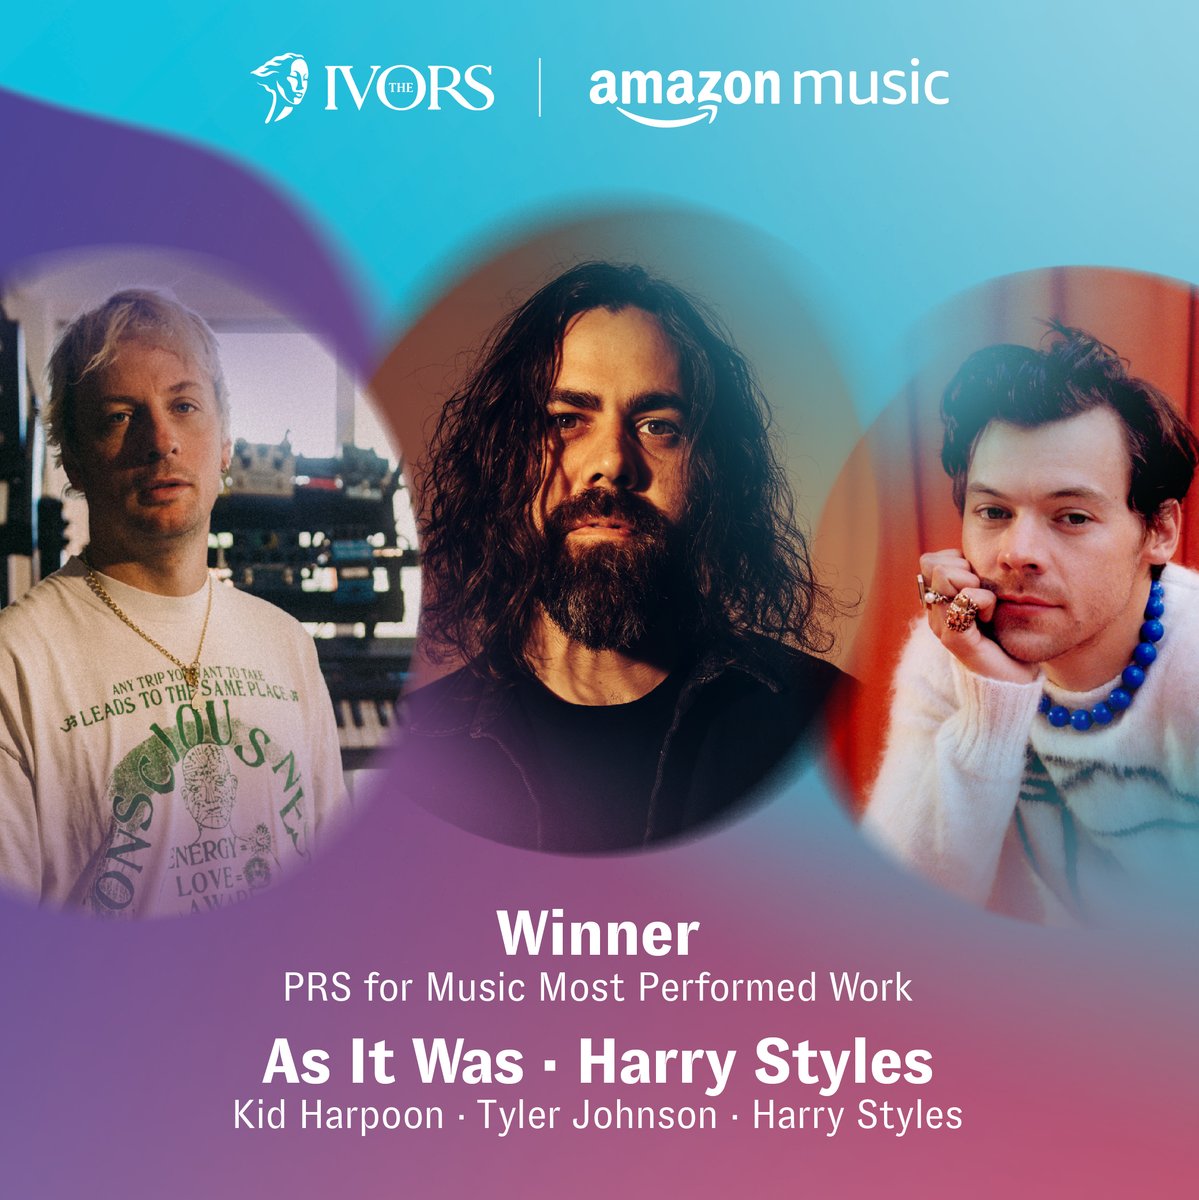 The Ivor for Most Performed Work with @PRSforMusic goes to... As It Was written by @kidharpoon, Tyler Johnson and @Harry_Styles 🎤

#TheIvors